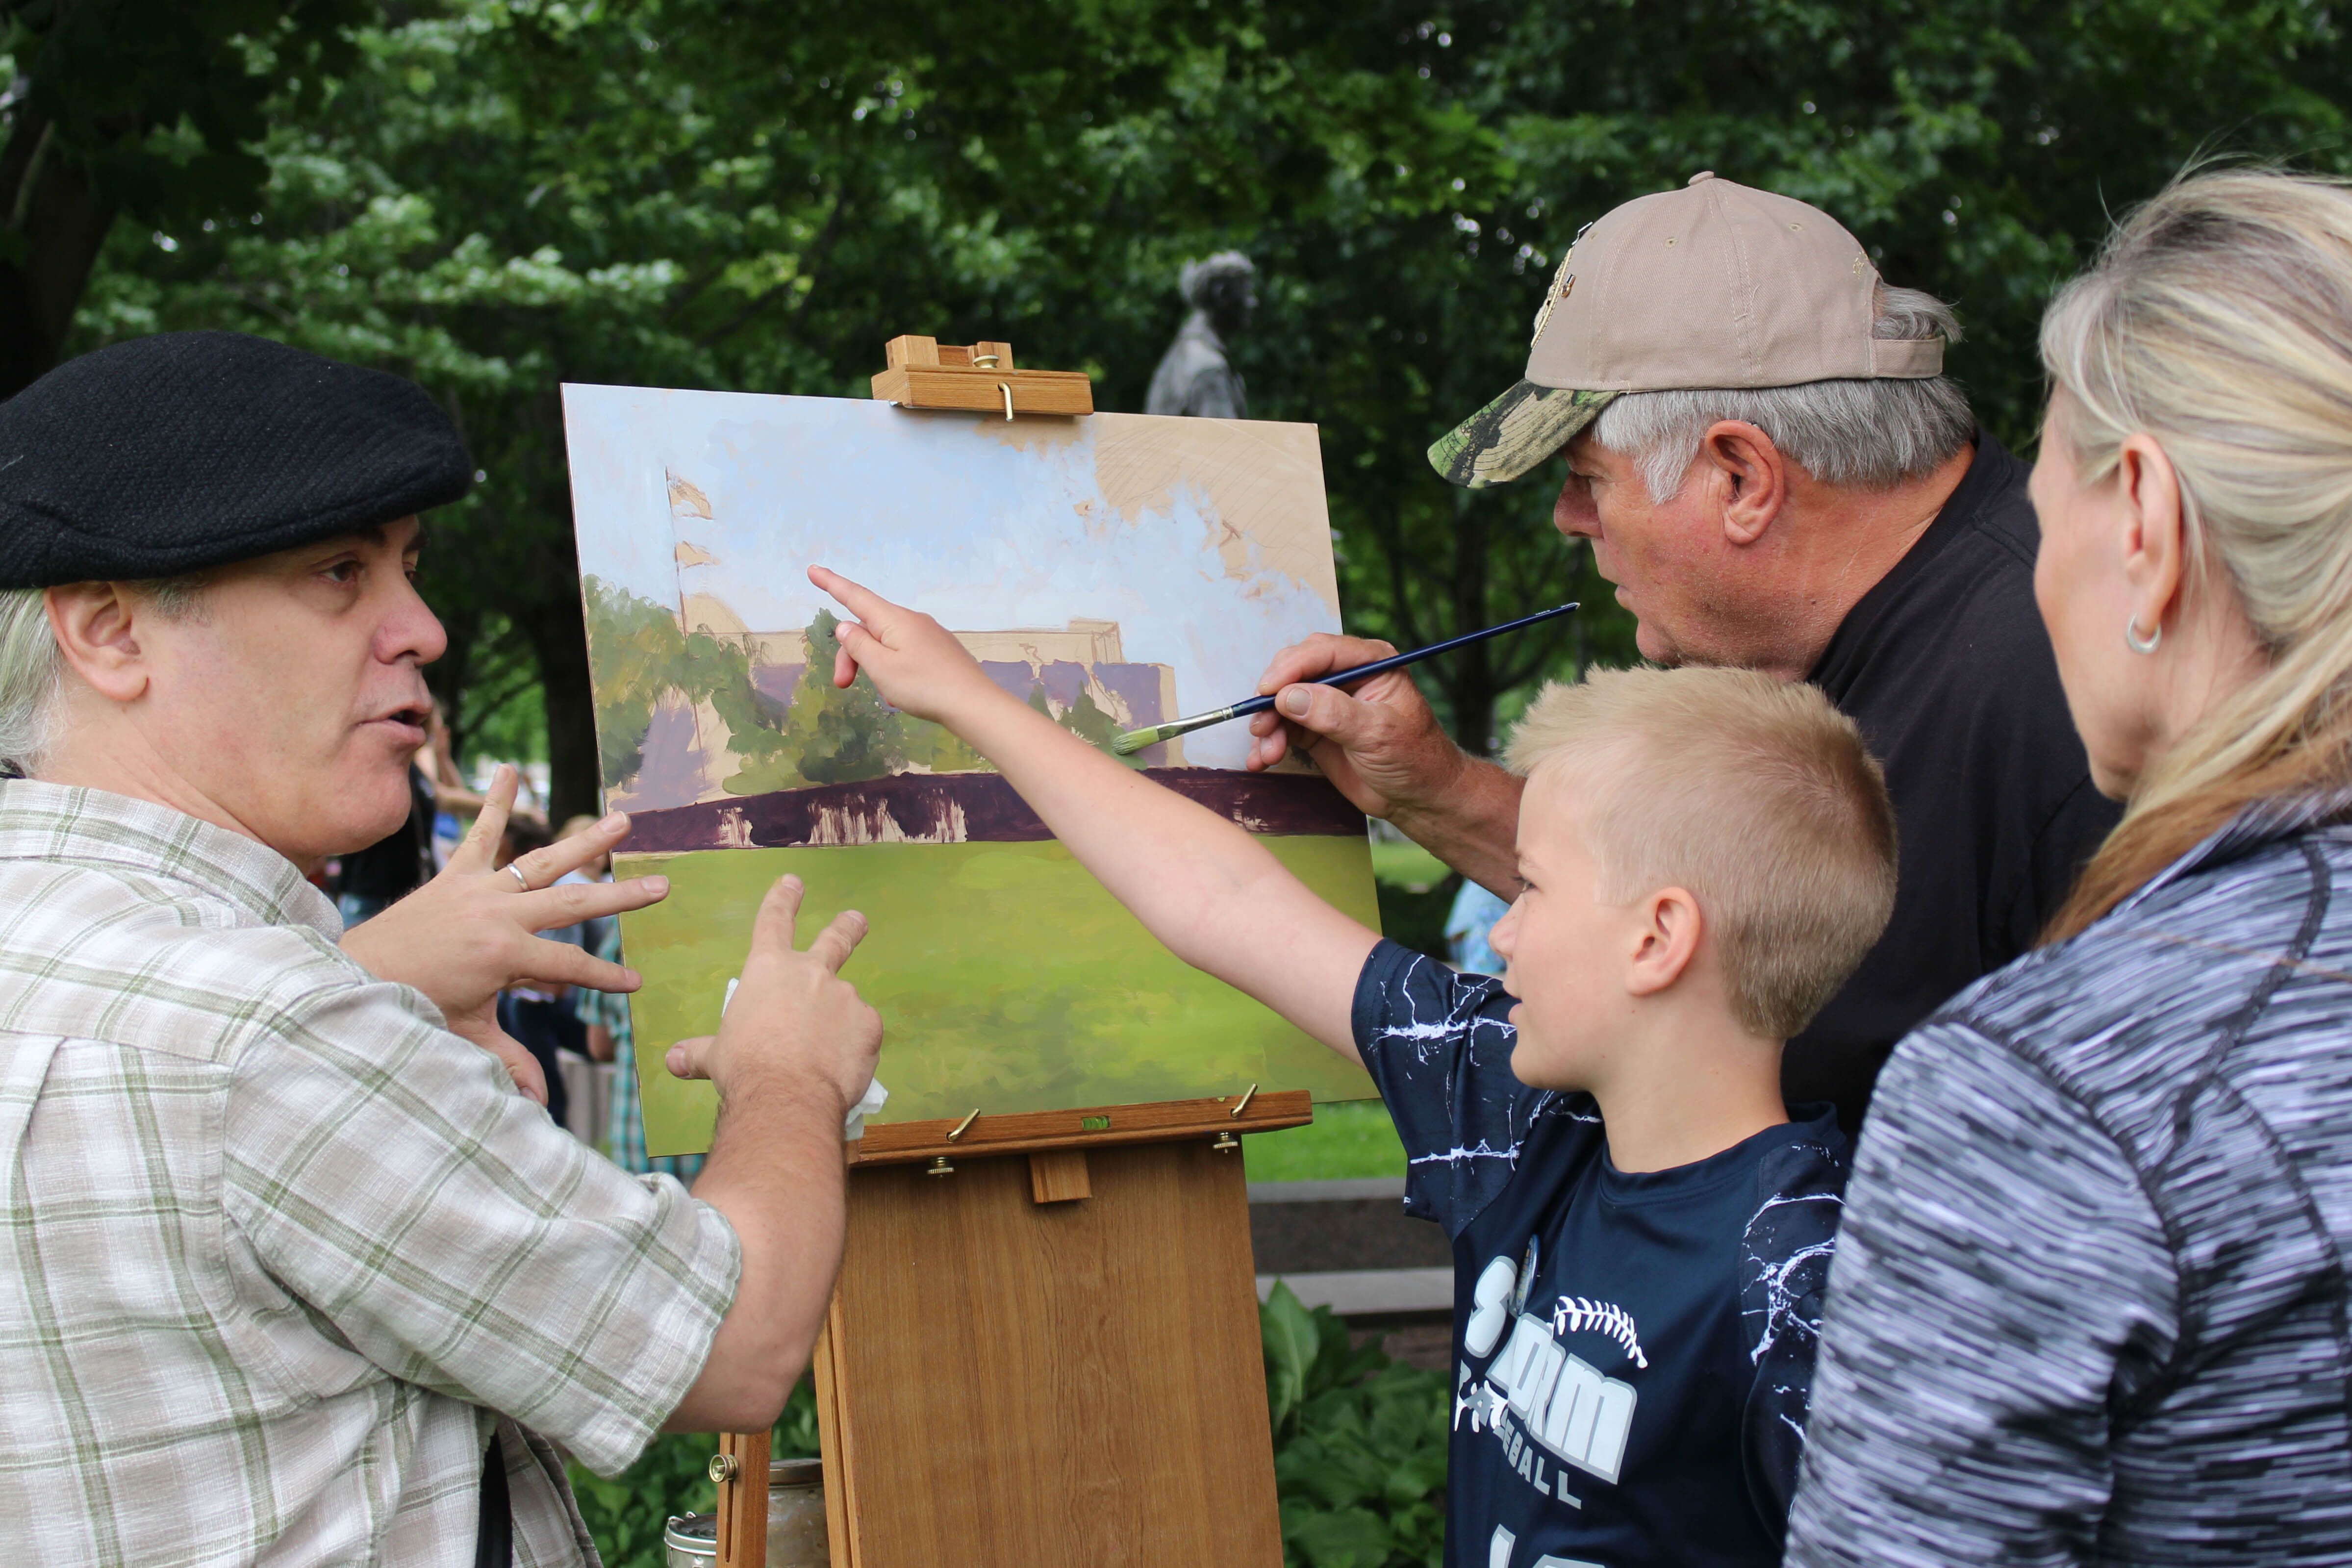 Group of people painting on a canvas outside.